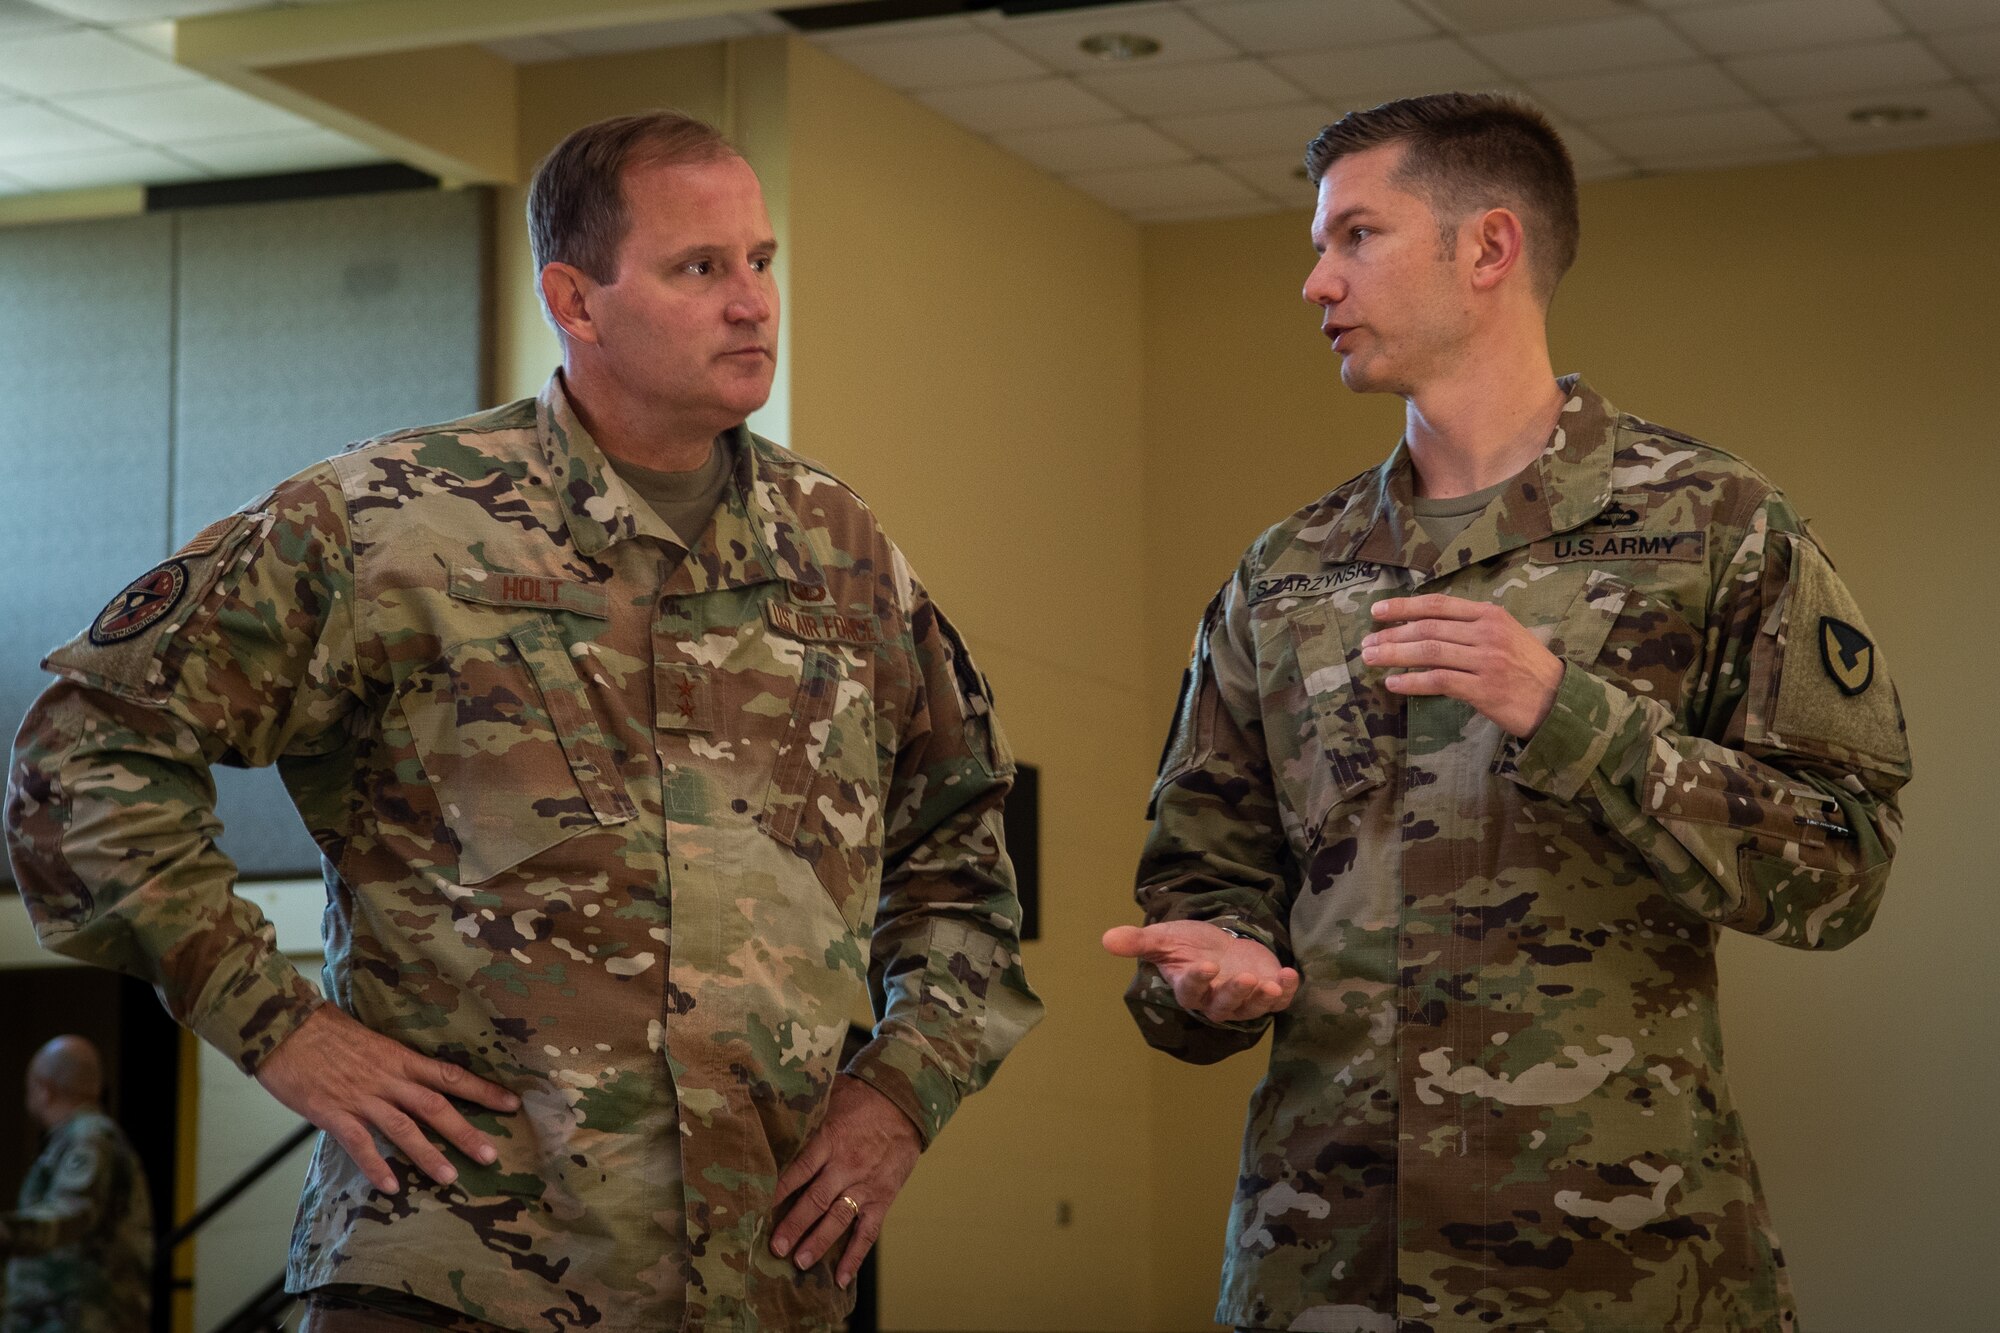 Army Maj. Matthew Szarzynski, right, 419th Contracting Support Brigade contracting officer speaks with Air Force Maj. Gen. Cameron Holt, Deputy Secretary for Contracting, Office of the Assistant Secretary of the Air Force for Acquisition, Technology and Logistics, at Fort Bragg, North Carolina, June 24, 2021. Holt visited the exercise and briefed airmen and soldiers on the benefits of working in a joint environment for training exercises. (U.S. Air Force photo by Airman 1st Class David Lynn)